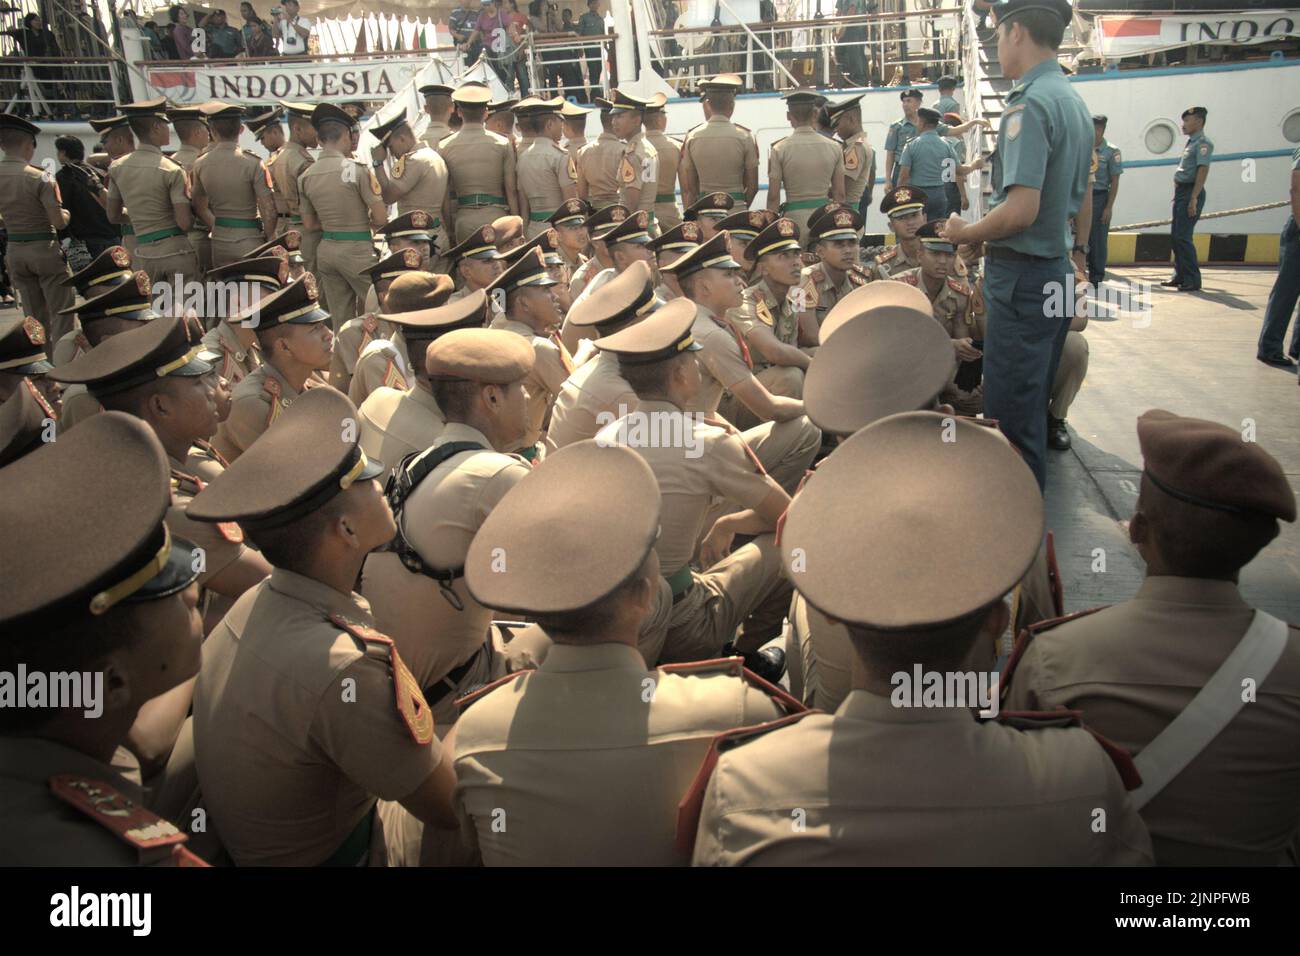 Indonesian navy cadets and officers attending a briefing, photographed from KRI Dewaruci (Dewa Ruci), an Indonesian tall ship, as the barquentine type schooner is opened for public visitors at Kolinlamil harbour (Navy harbour) in Tanjung Priok, North Jakarta, Jakarta, Indonesia. Stock Photo